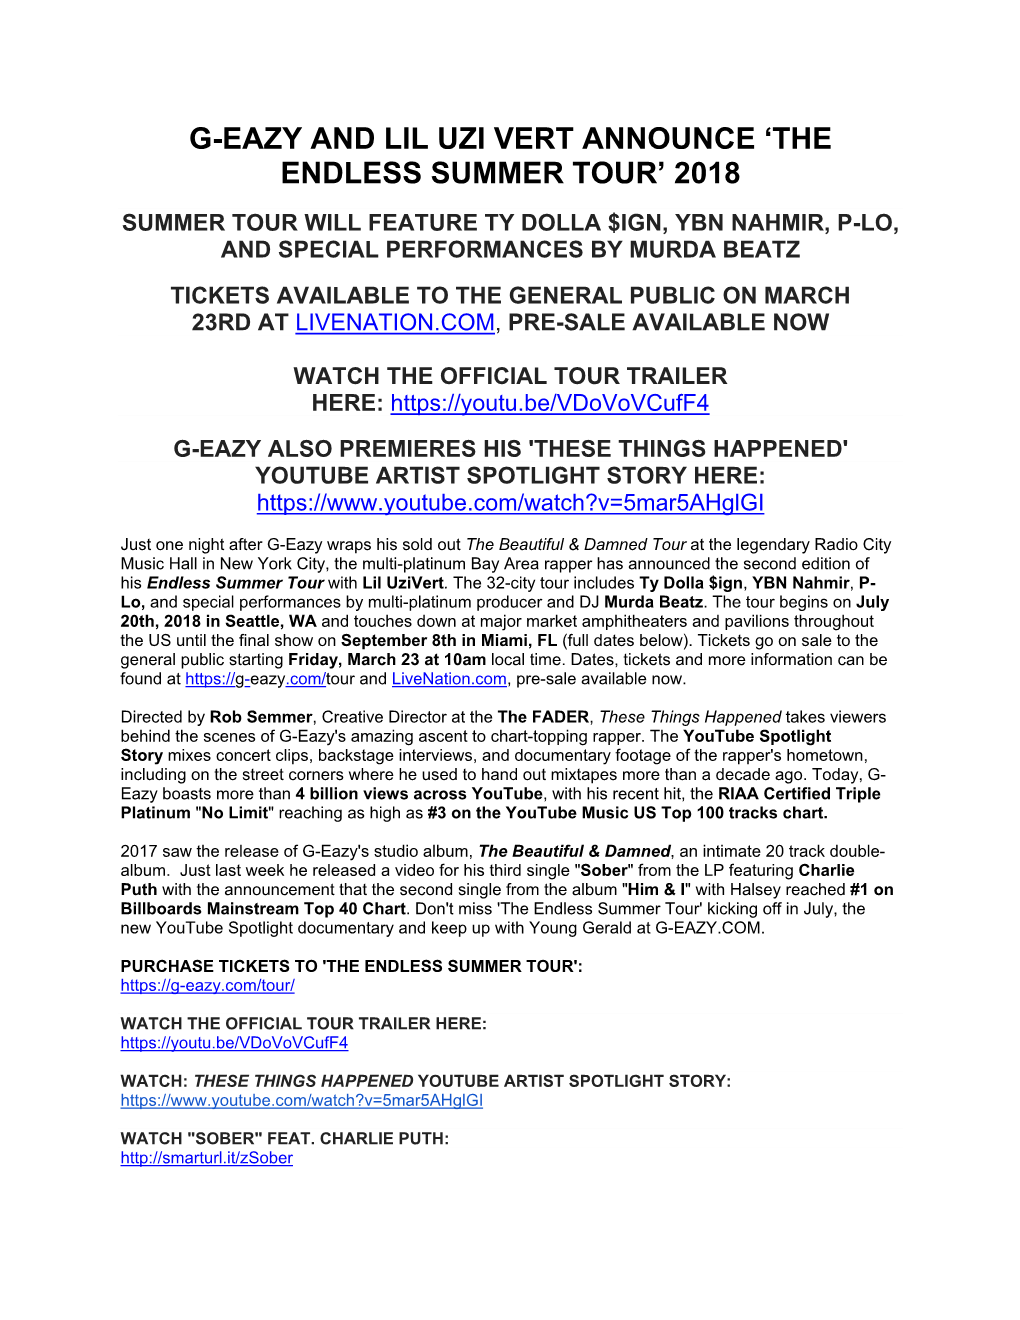 The Endless Summer Tour’ 2018